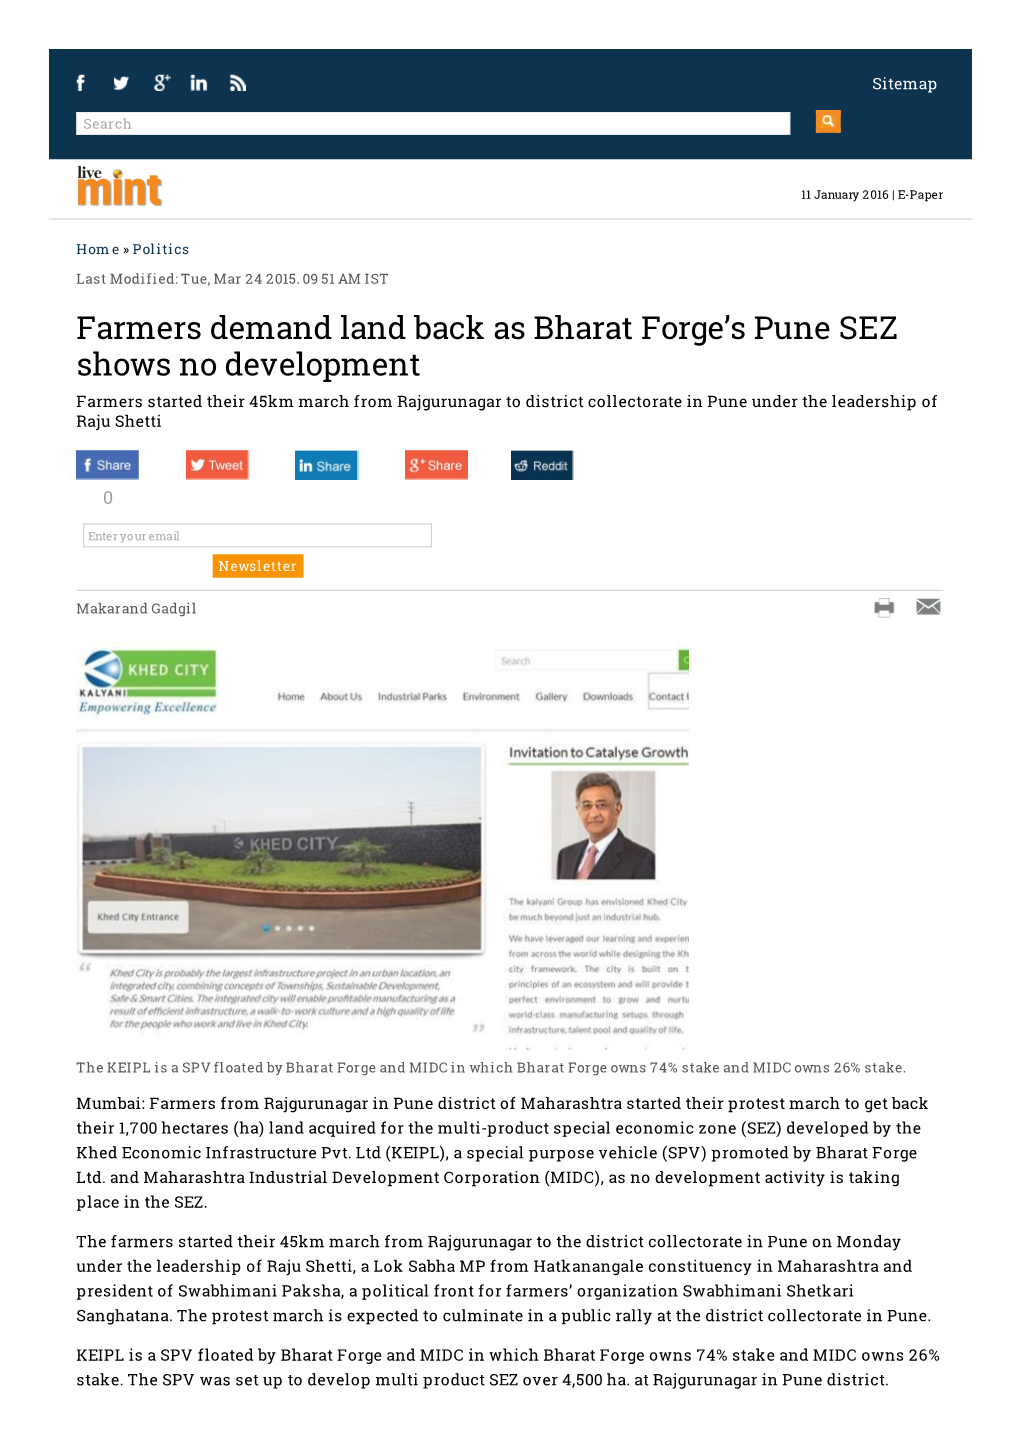 Farmers Demand Land Back As Bharat Forge's Pune SEZ